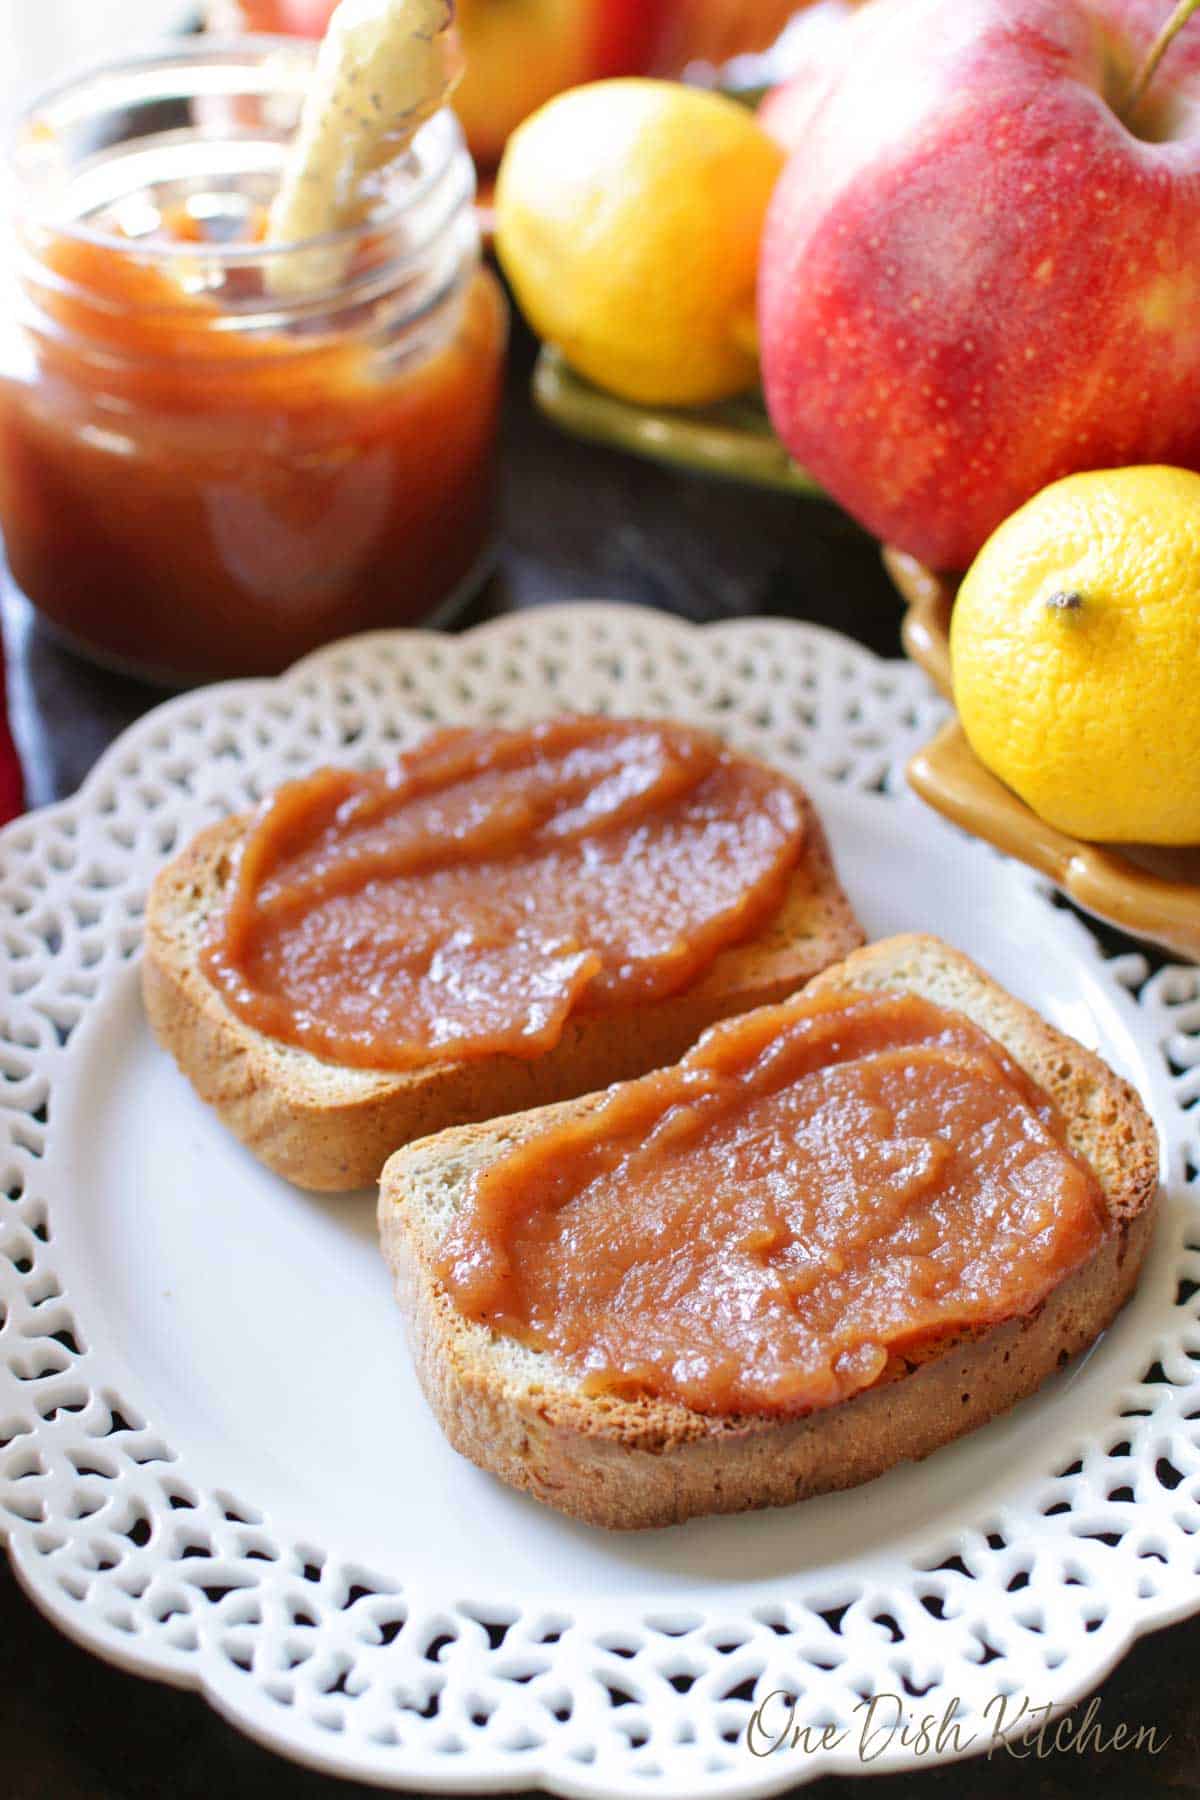 Apple butter spread on two slices of toast plated next to a small jar of apple butter with a knife and a bowl of apples and lemons.